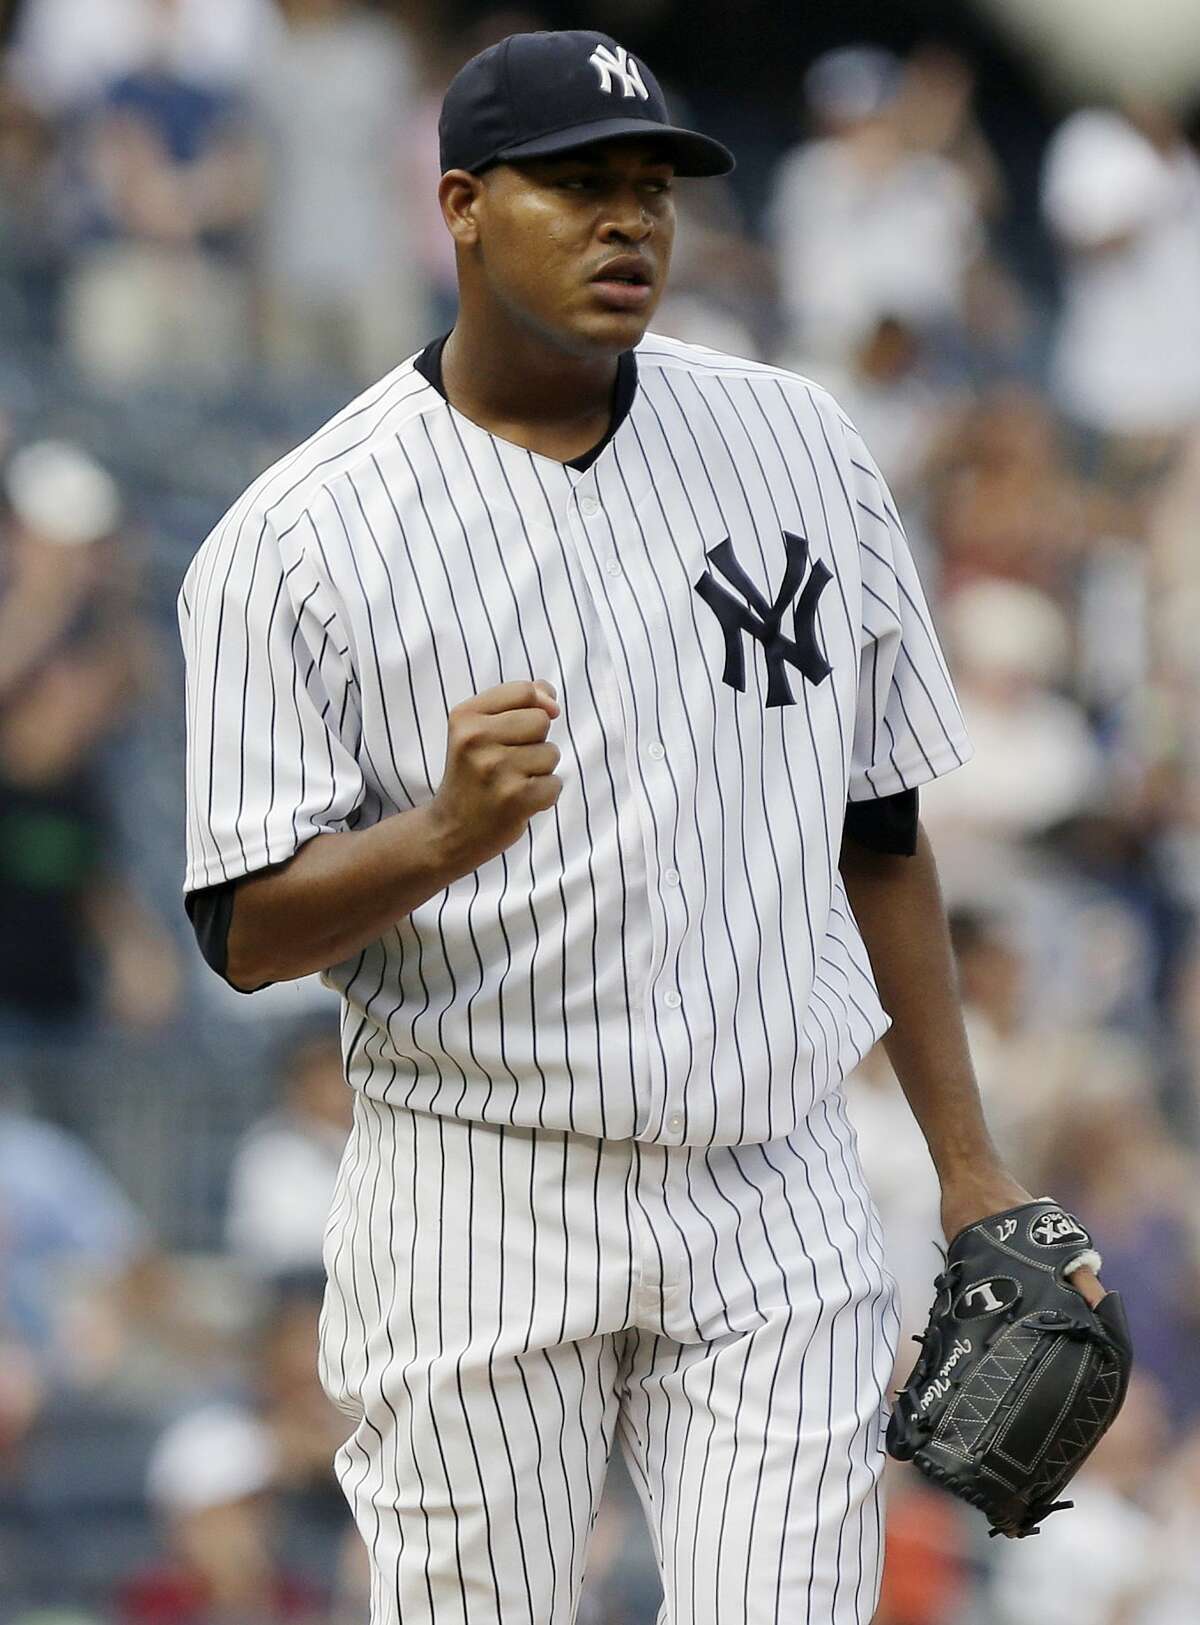 The Yankees agreed to a one-year, non-guaranteed contract with pitcher Ivan Nova on Wednesday, thus avoiding arbitration.